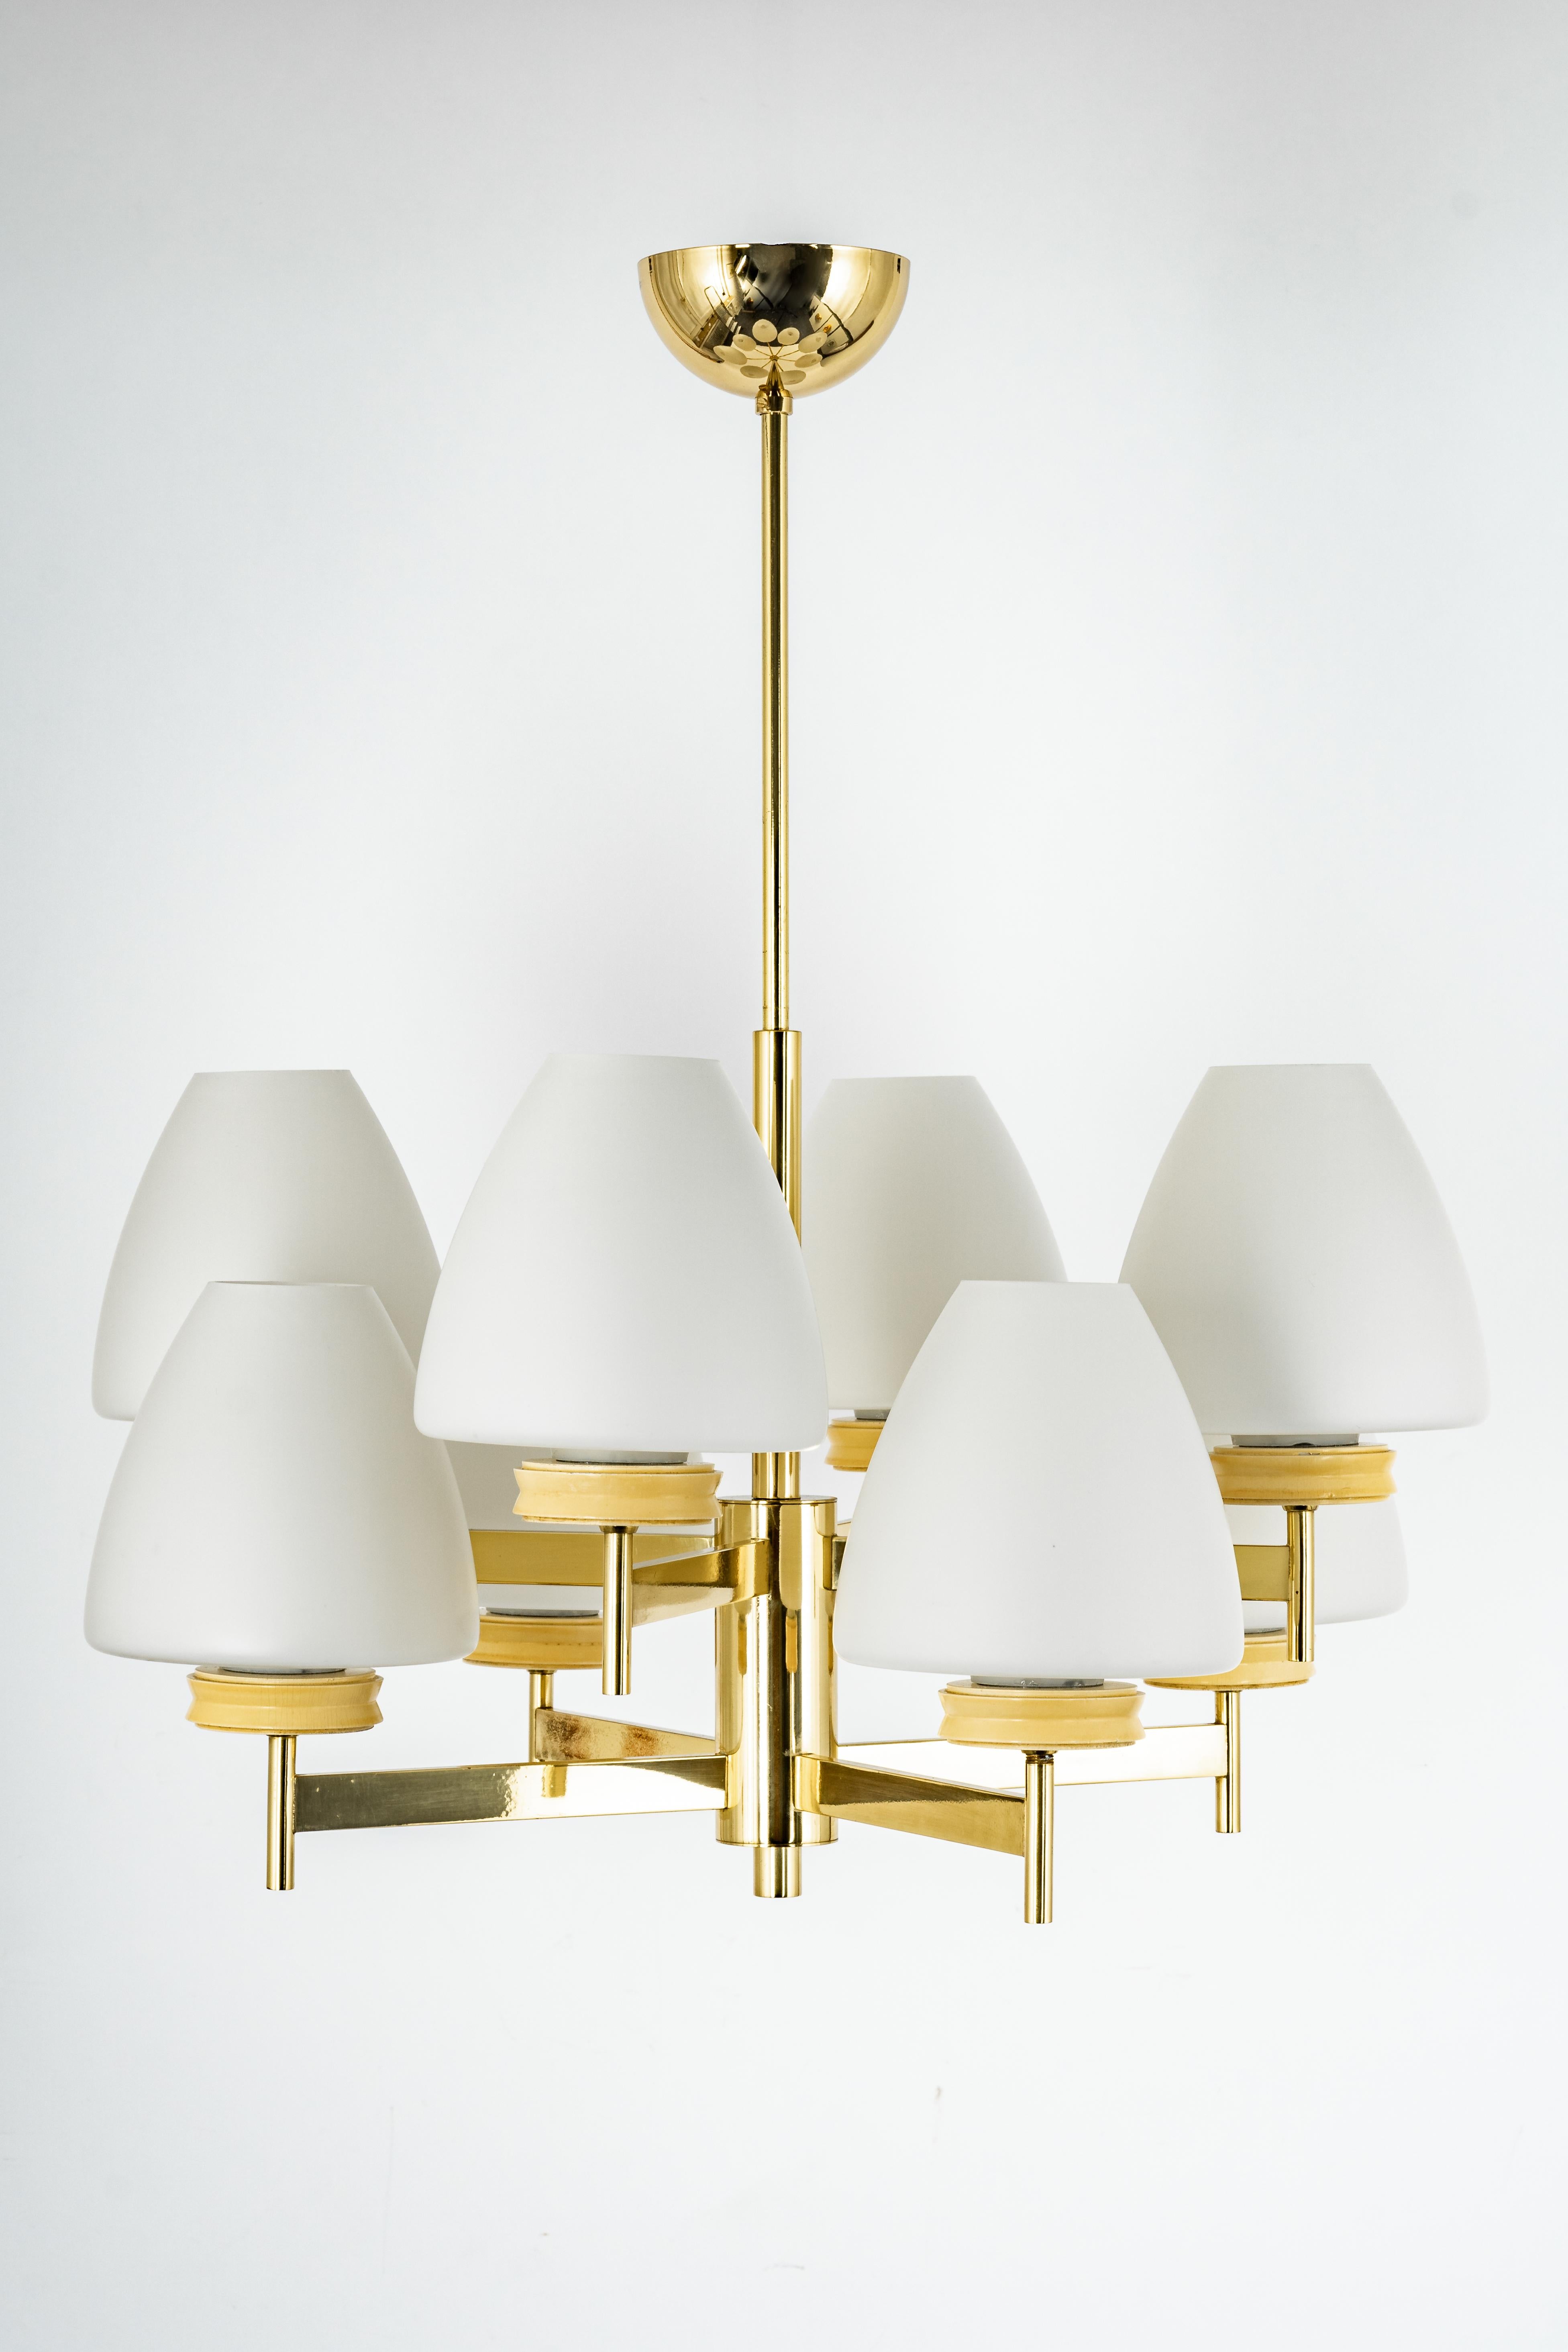 Stunning Sputnik brass chandelier with eight opal glass globes by Kaiser Leuchten, Germany, 1960s.

Heavy quality and in very good condition. Cleaned, well-wired and ready to use. 

The fixture requires 8x E14 small bulbs with 40W max